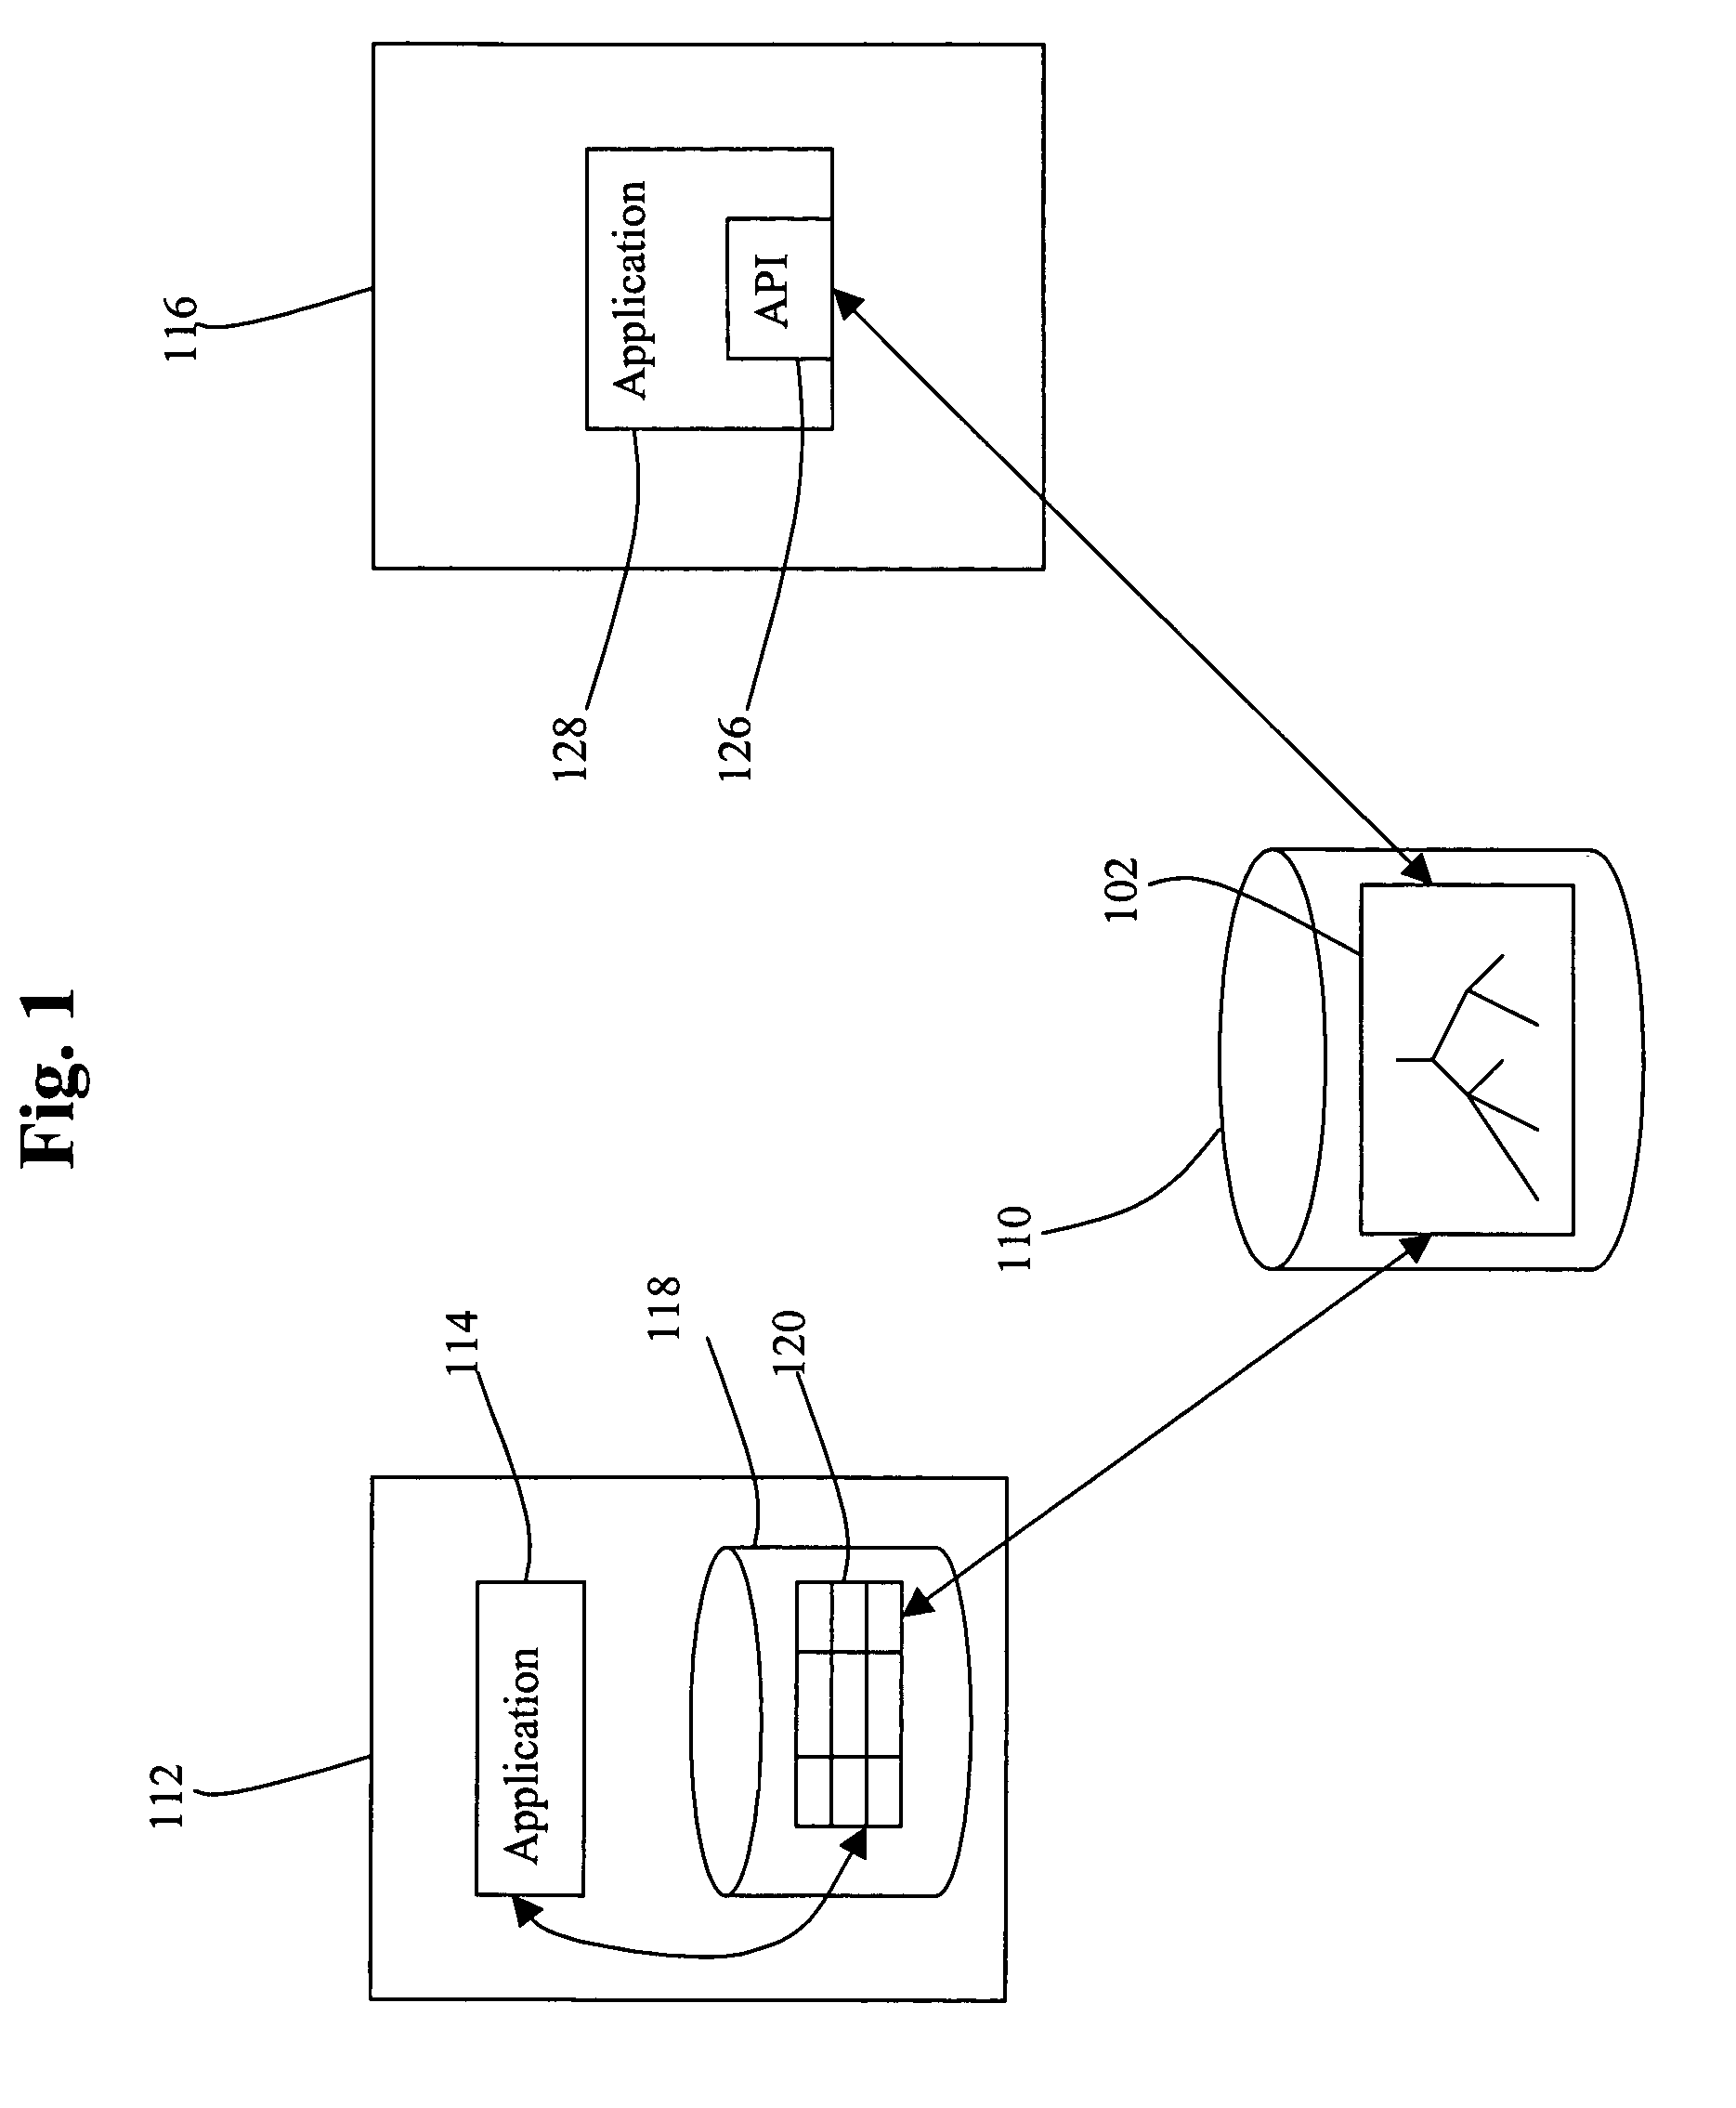 Method and system for implementing and accessing a virtual table on data from a central server